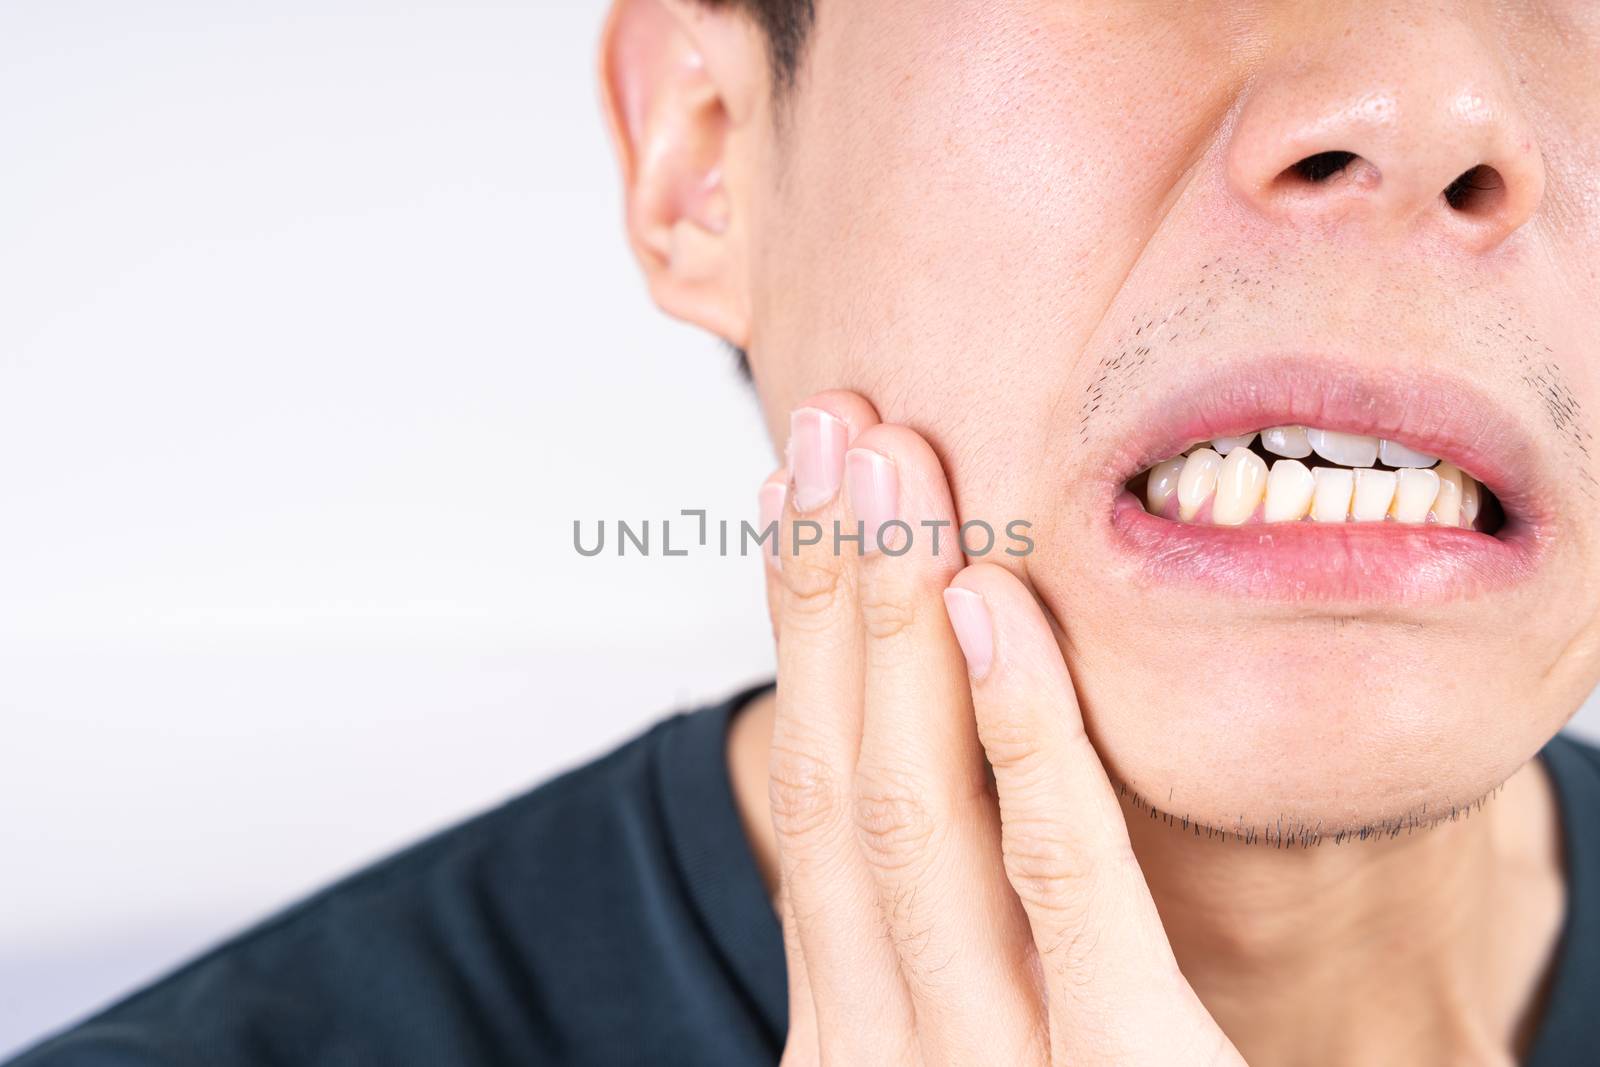 Man suffering from toothache, hand touching wisdom tooth. Dental, healthcare concept by mikesaran